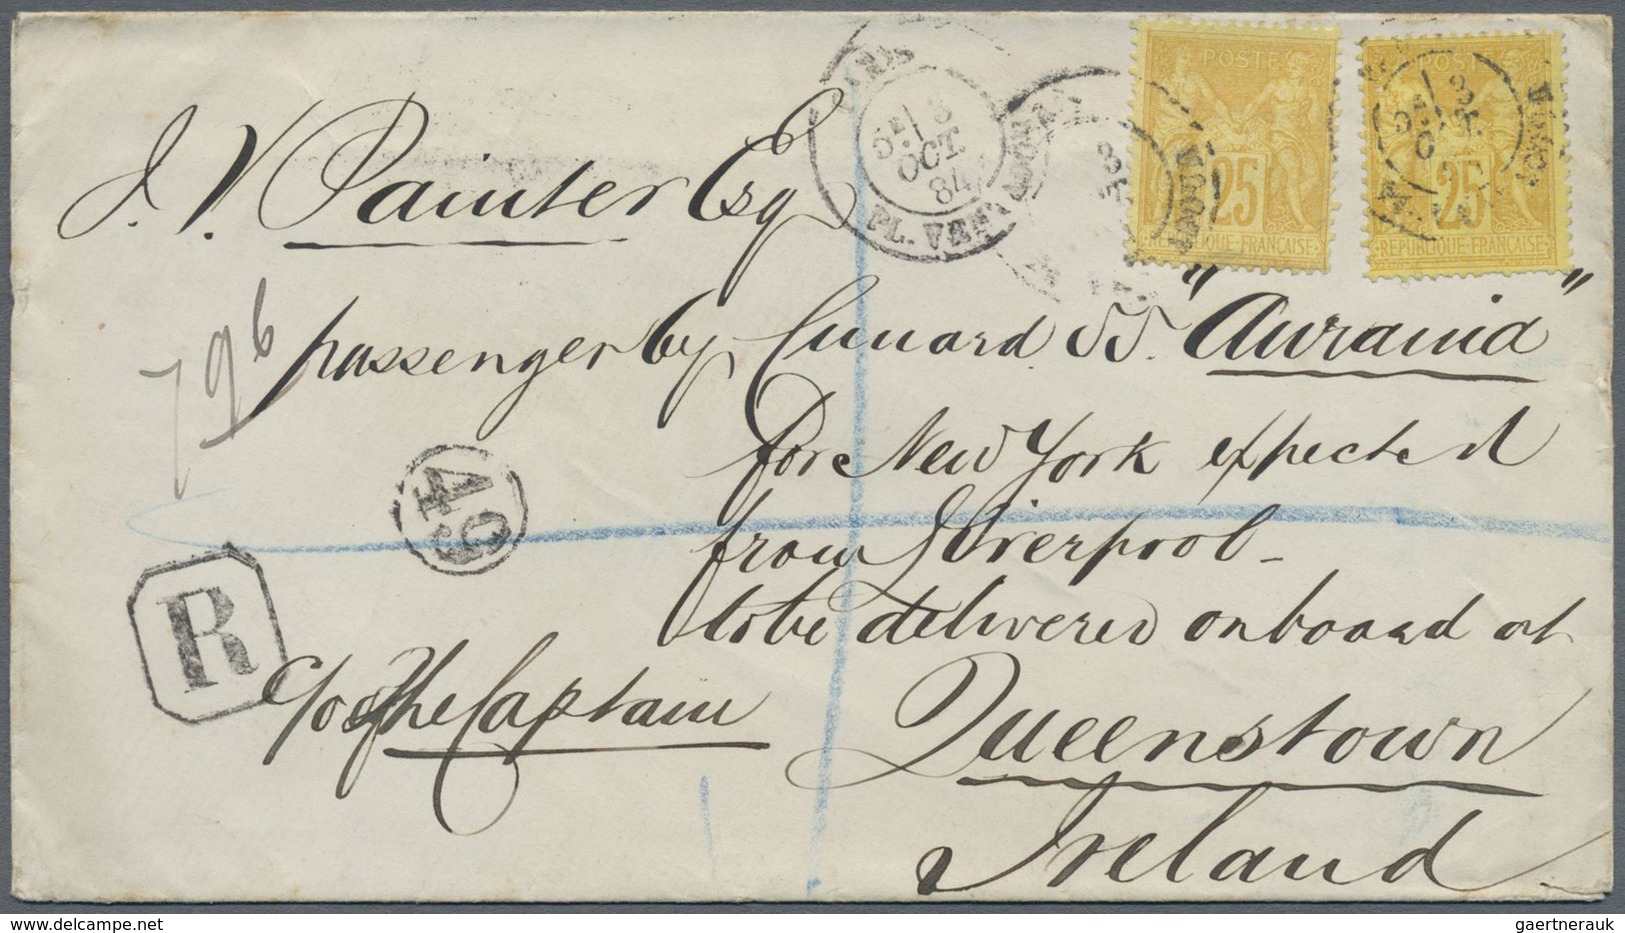 Br Frankreich: 1880/1980 (ca.), Mail to USA, holding of more than 400 (mainly commercial) covers/cards,